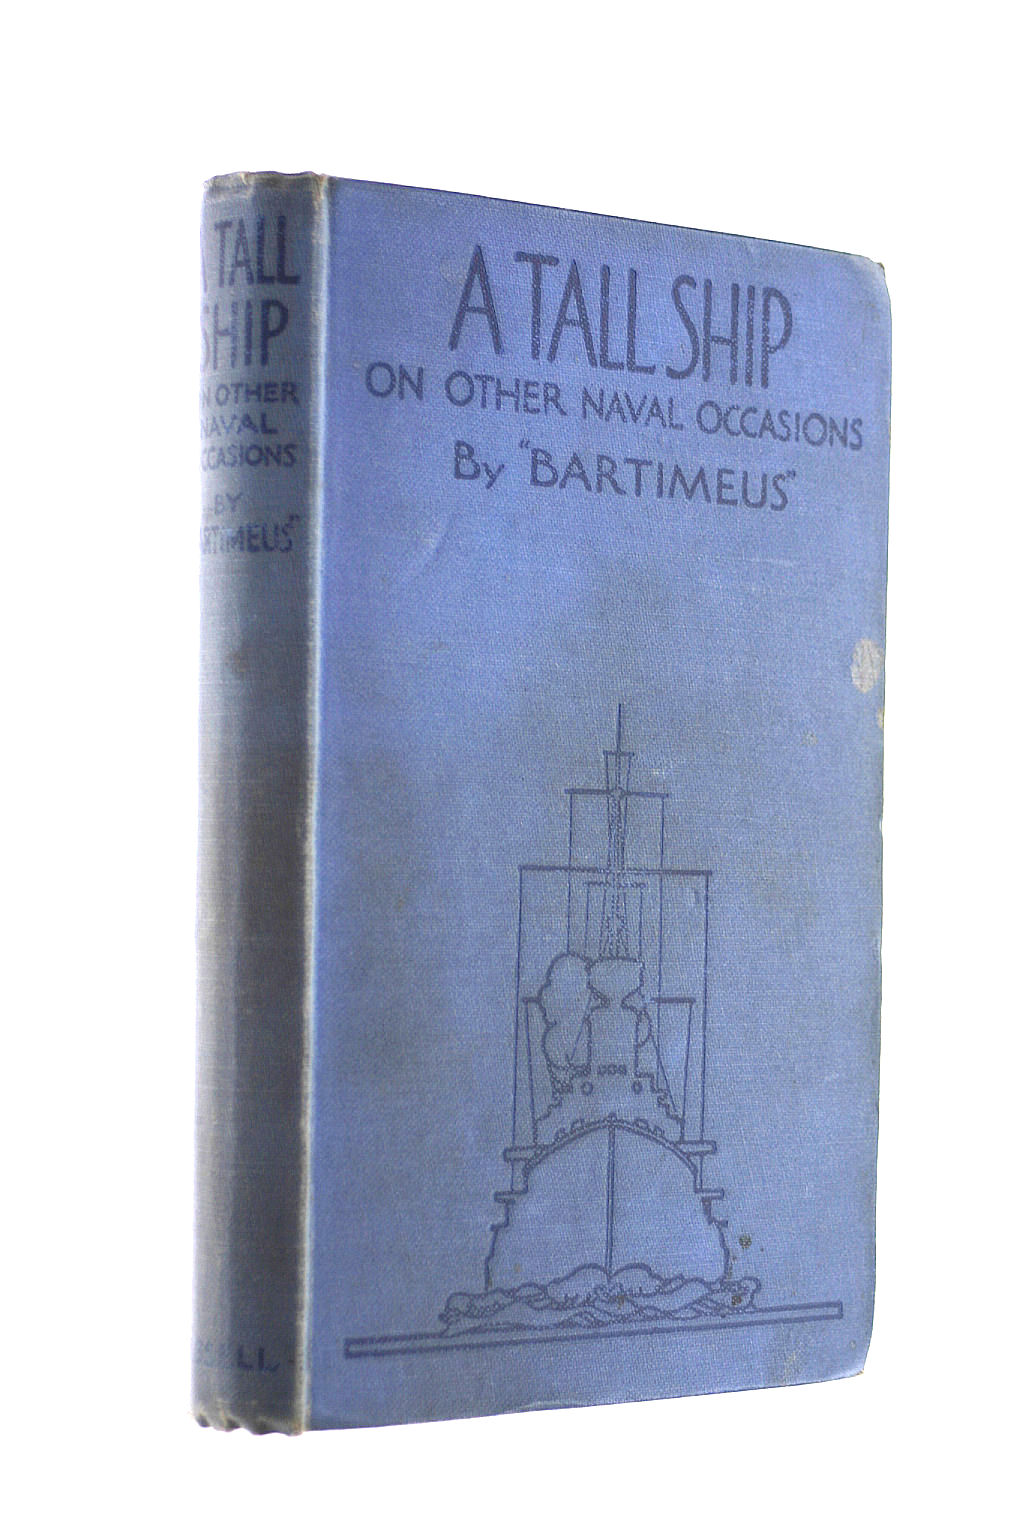 BARTIMEUS - A Tall Ship on Other Naval Occasions [Hardcover]